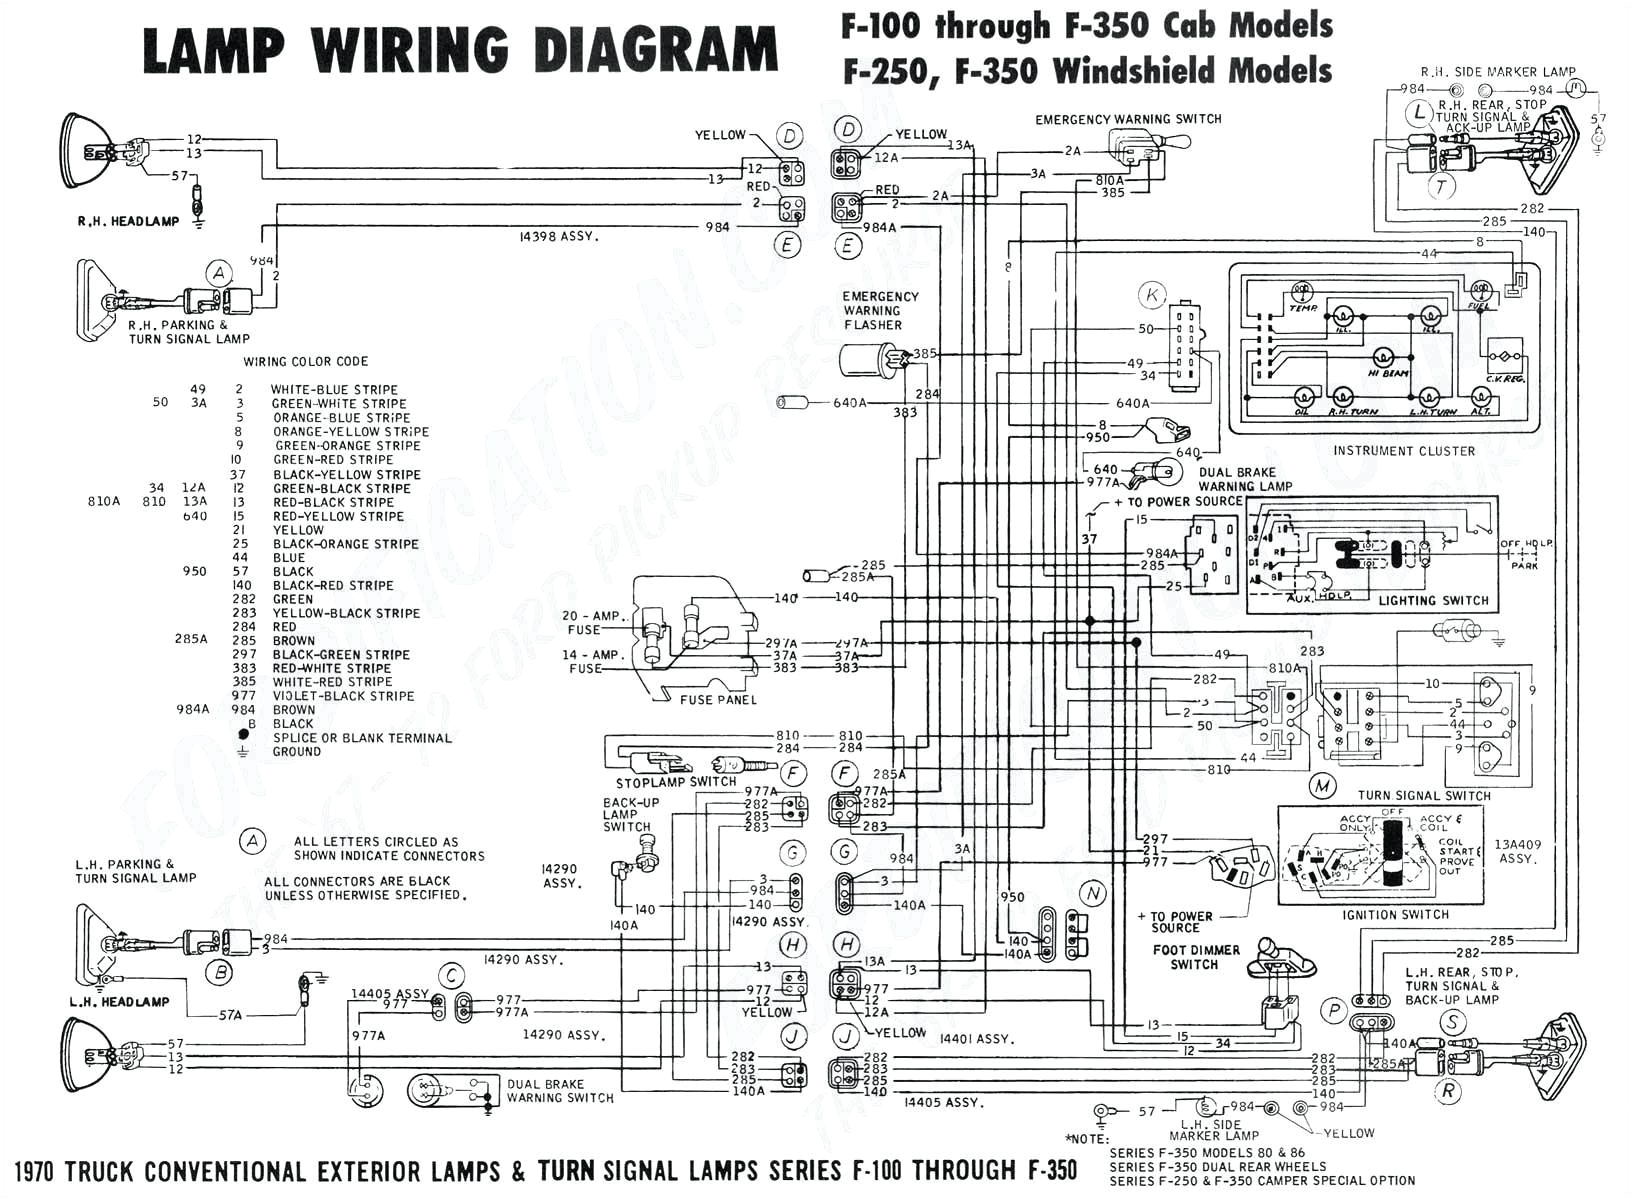 1989 cadillac wiring harness color codes in stereo wiring diagram 1989 cadillac wiring harness color codes in stereo